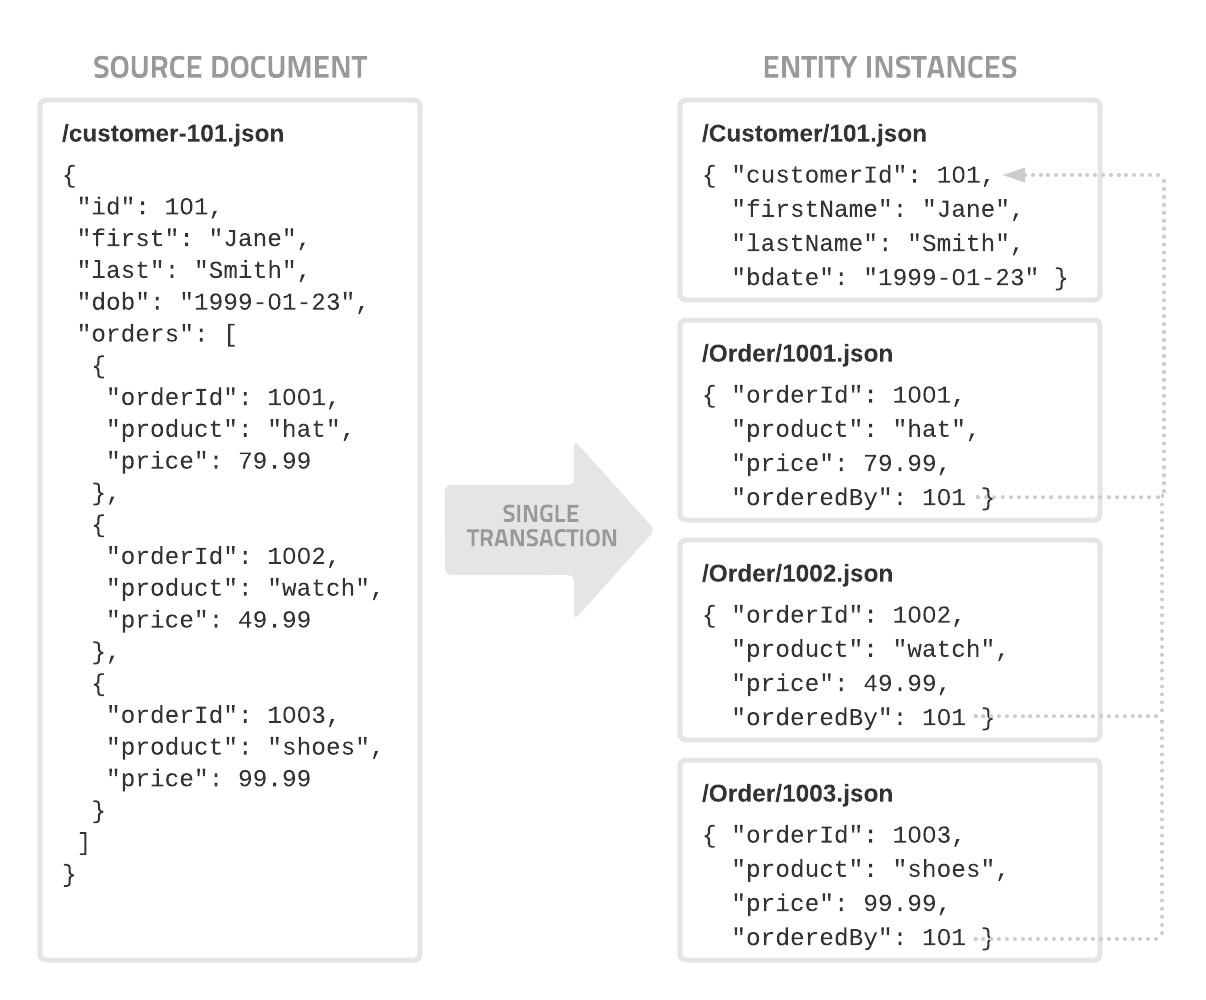 Mapping multiple entities from a single source document